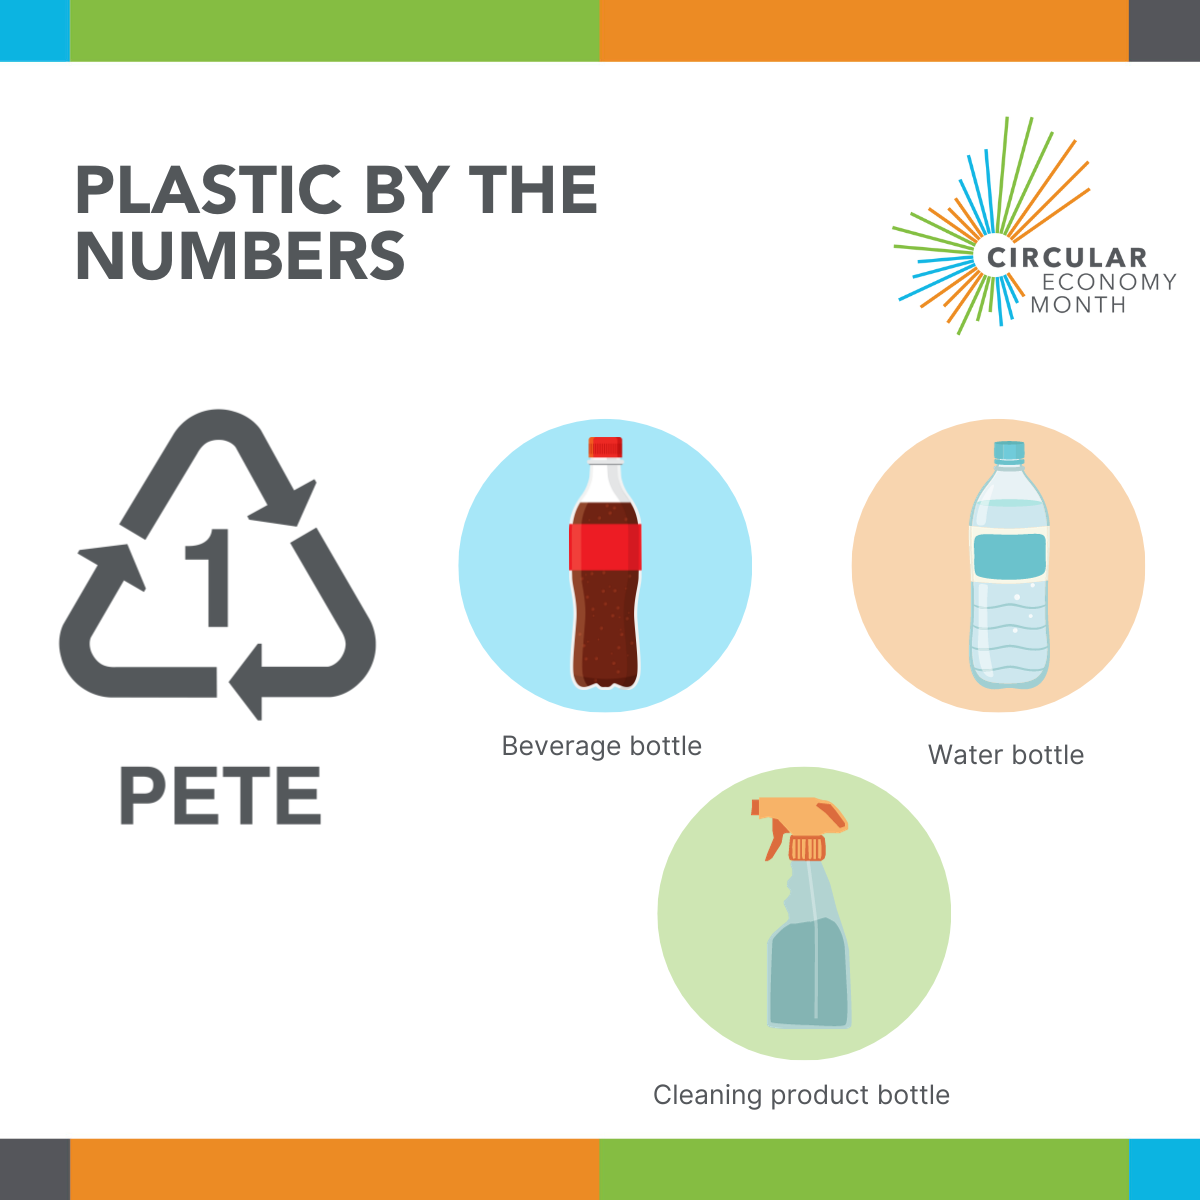 It's not just your plastics you can recycle!